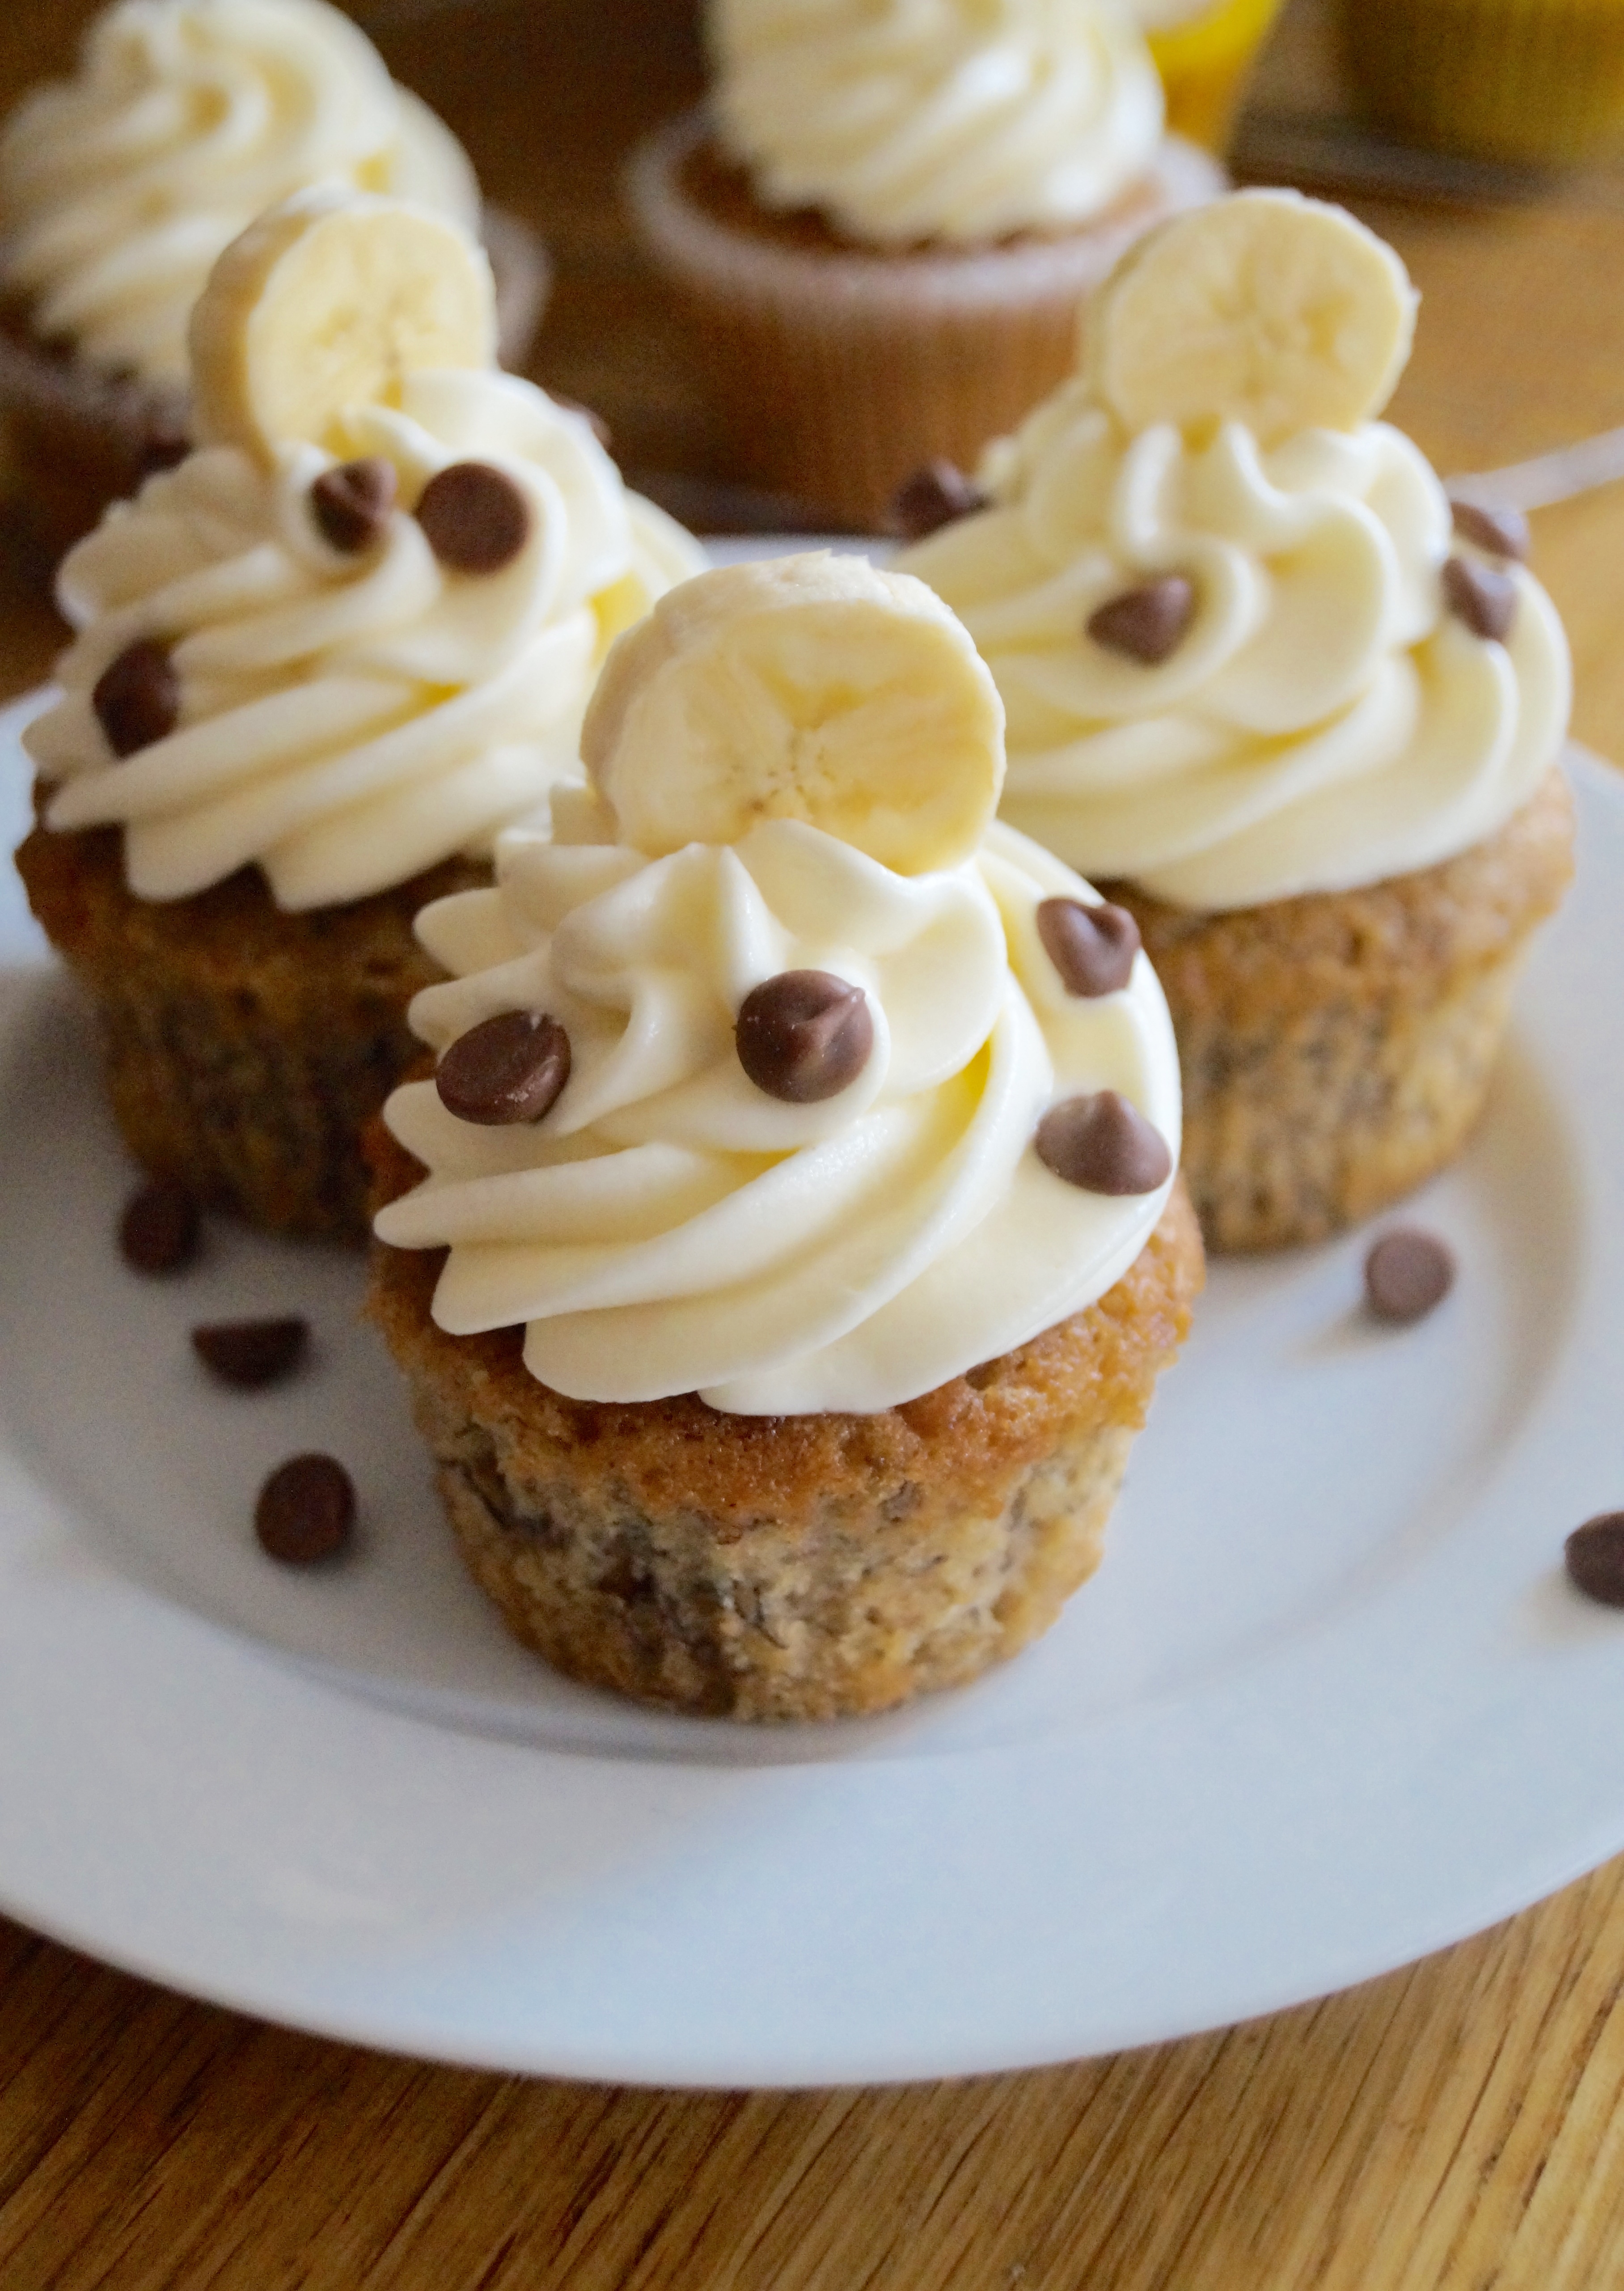 Banana Cupcakes with Cream Cheese Frosting | What Jessica Baked Next...